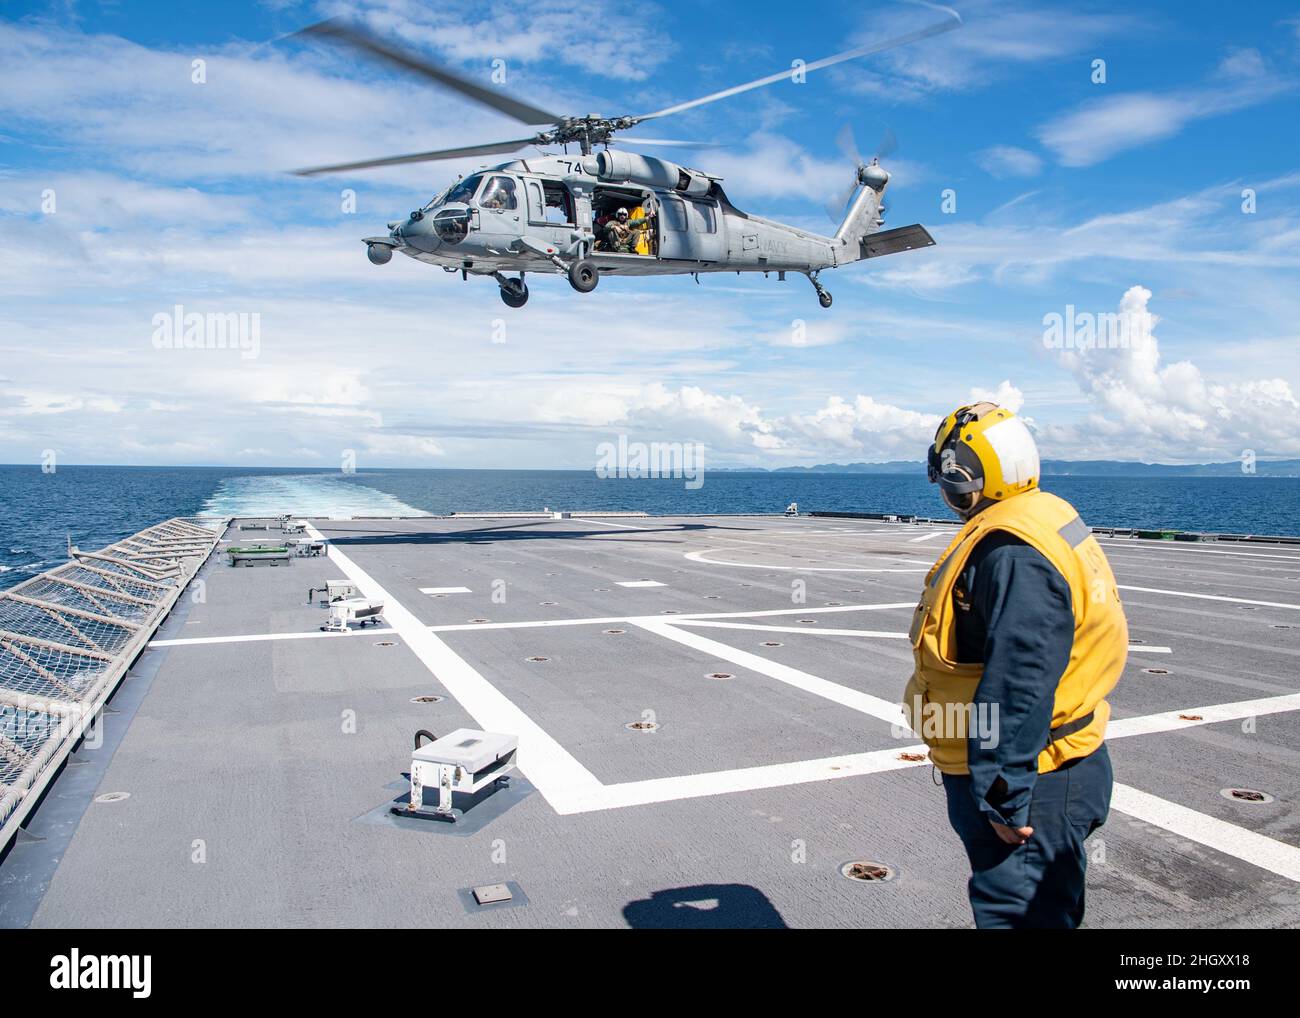 220120-N-PH222-1118 SAN BERNARDINO STRAIT (Jan. 20, 2022)    Mineman 2nd Class Roslin Menotapar, from Bossier City, Louisiana, salutes an MH-60S Sea Hawk Helicopter, assigned to the “Blackjacks” of Helicopter Sea Combat Squadron (HSC) 21, from the flight deck aboard Independence-variant littoral combat ship USS Charleston (LCS 18), during an archipelagic sea lane pass through the San Bernardino Strait, crossing from the Philippine Sea into the South China Sea. Charleston, part of Destroyer Squadron (DESRON) 7, is on a rotational deployment in the U.S. 7th Fleet area of operation to enhance int Stock Photo